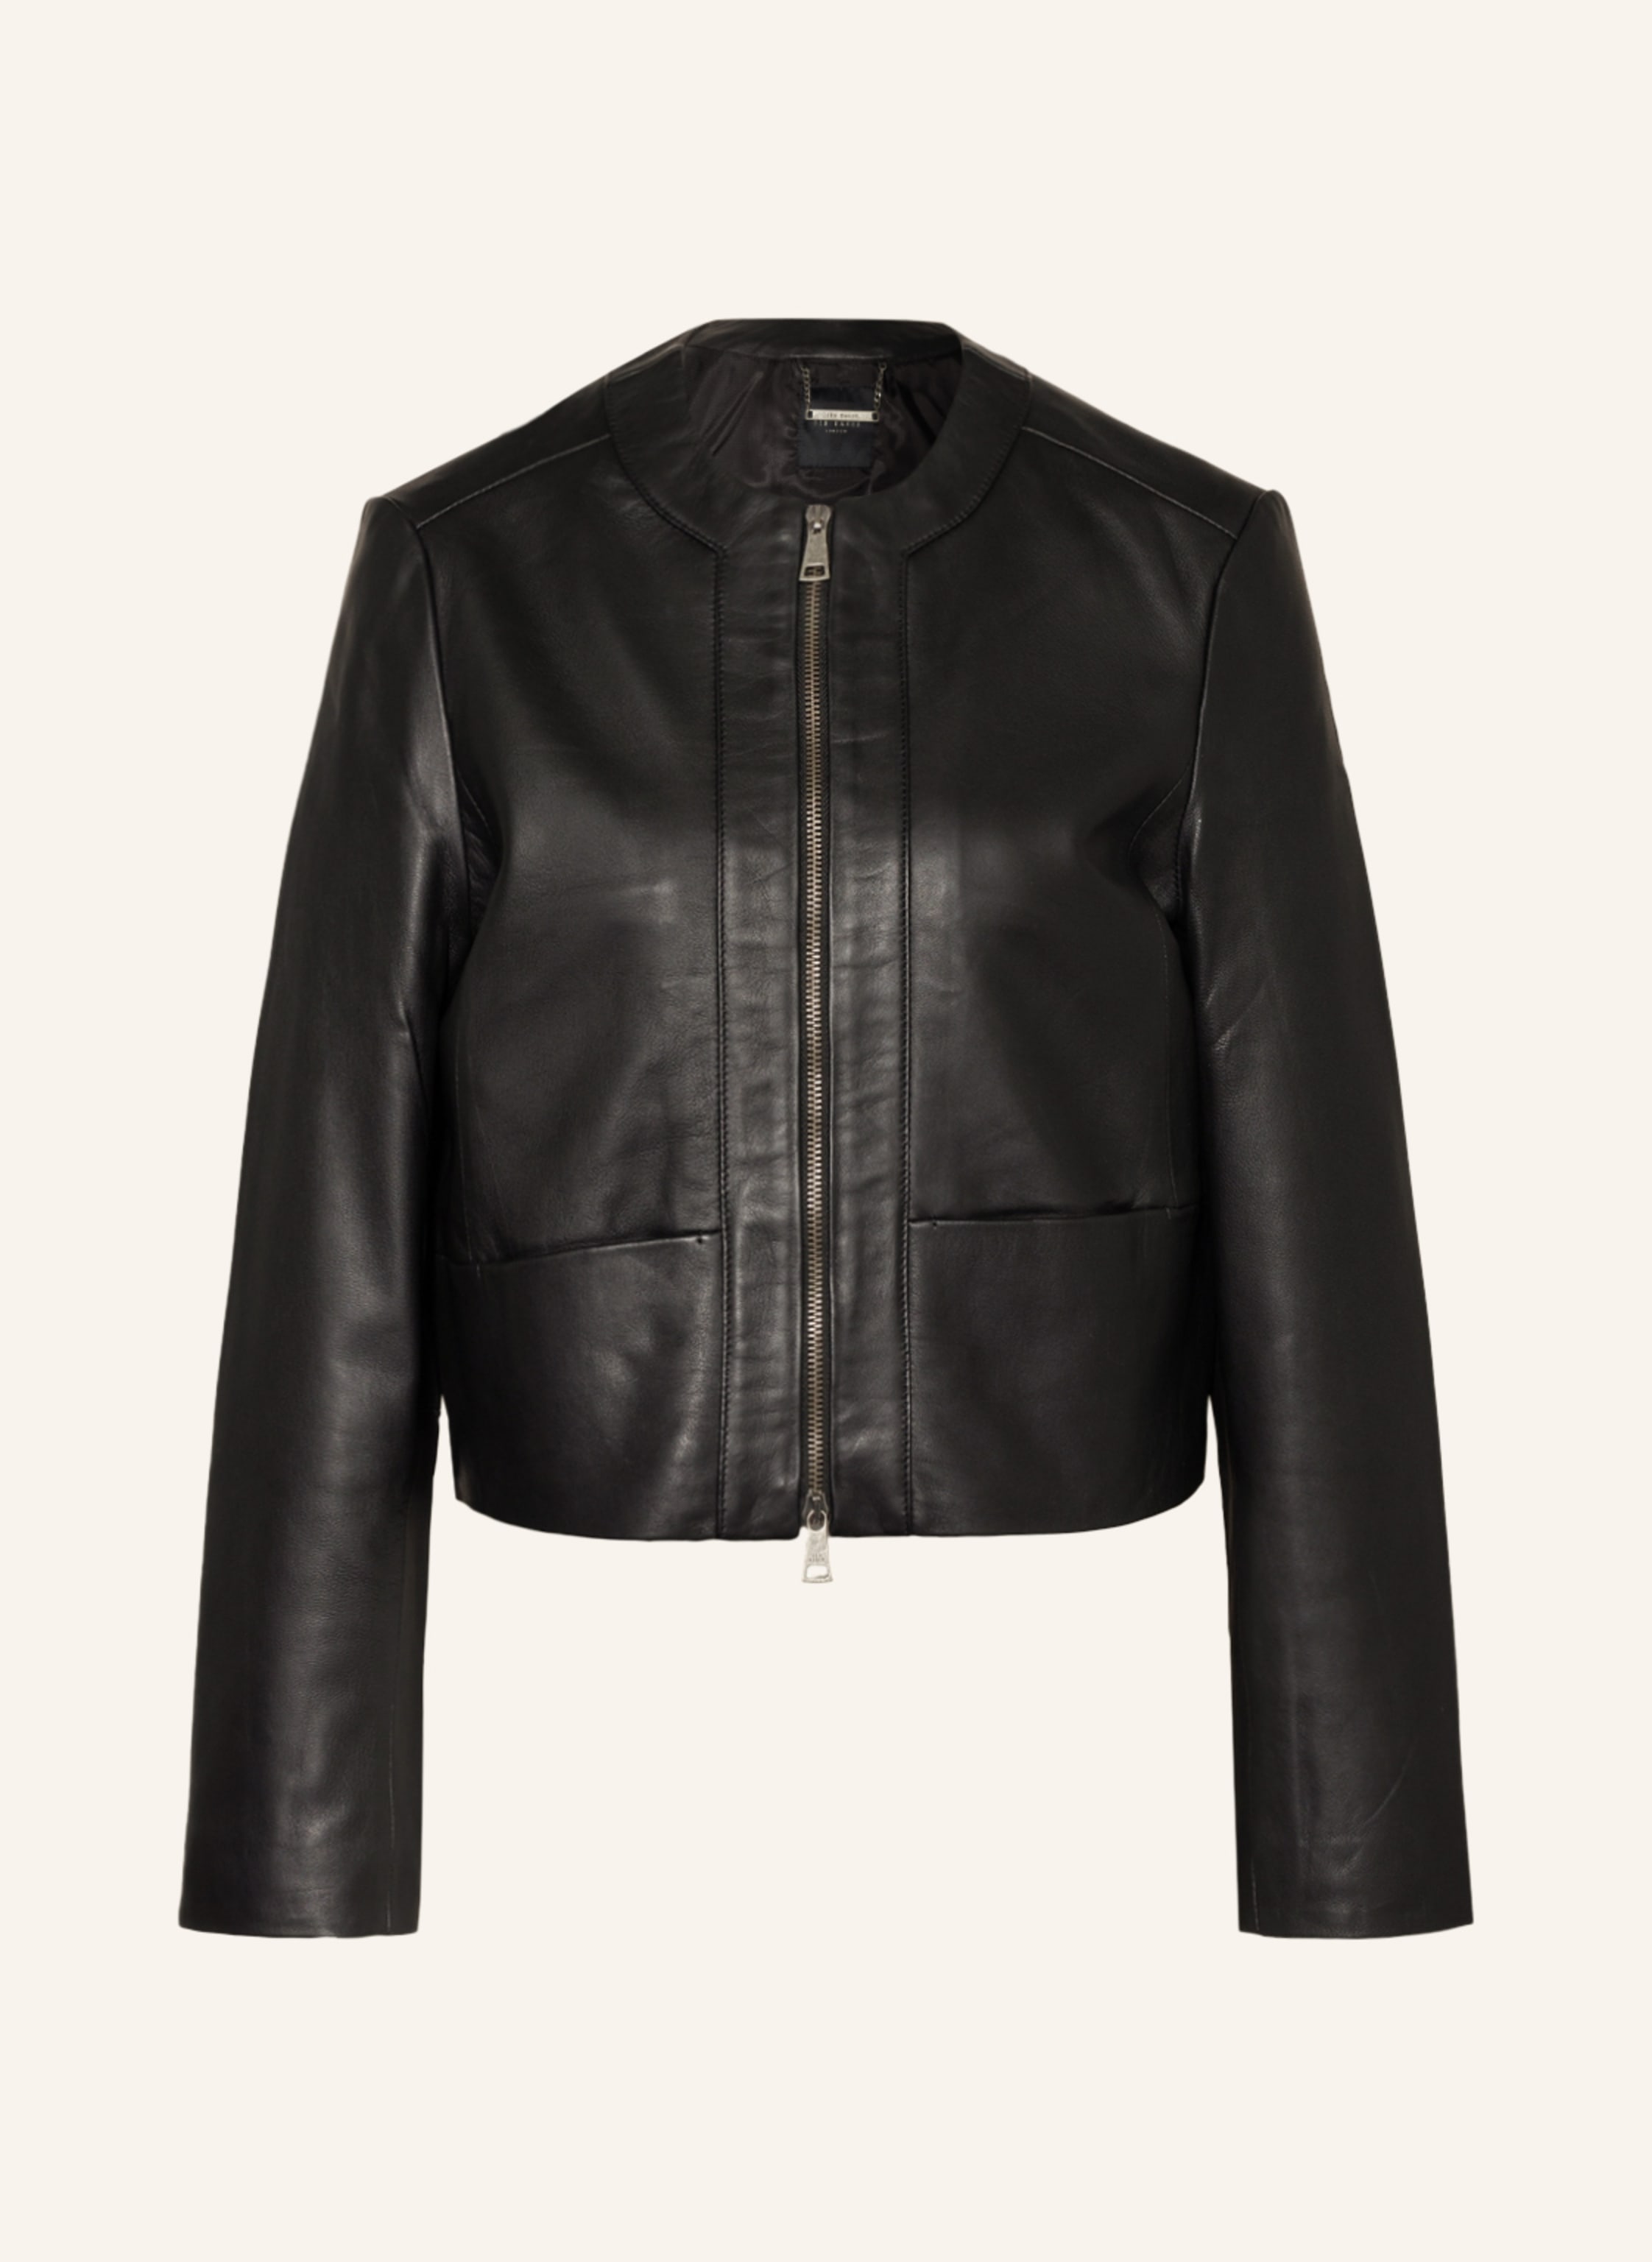 TED BAKER Leather jacket CLARYA in black